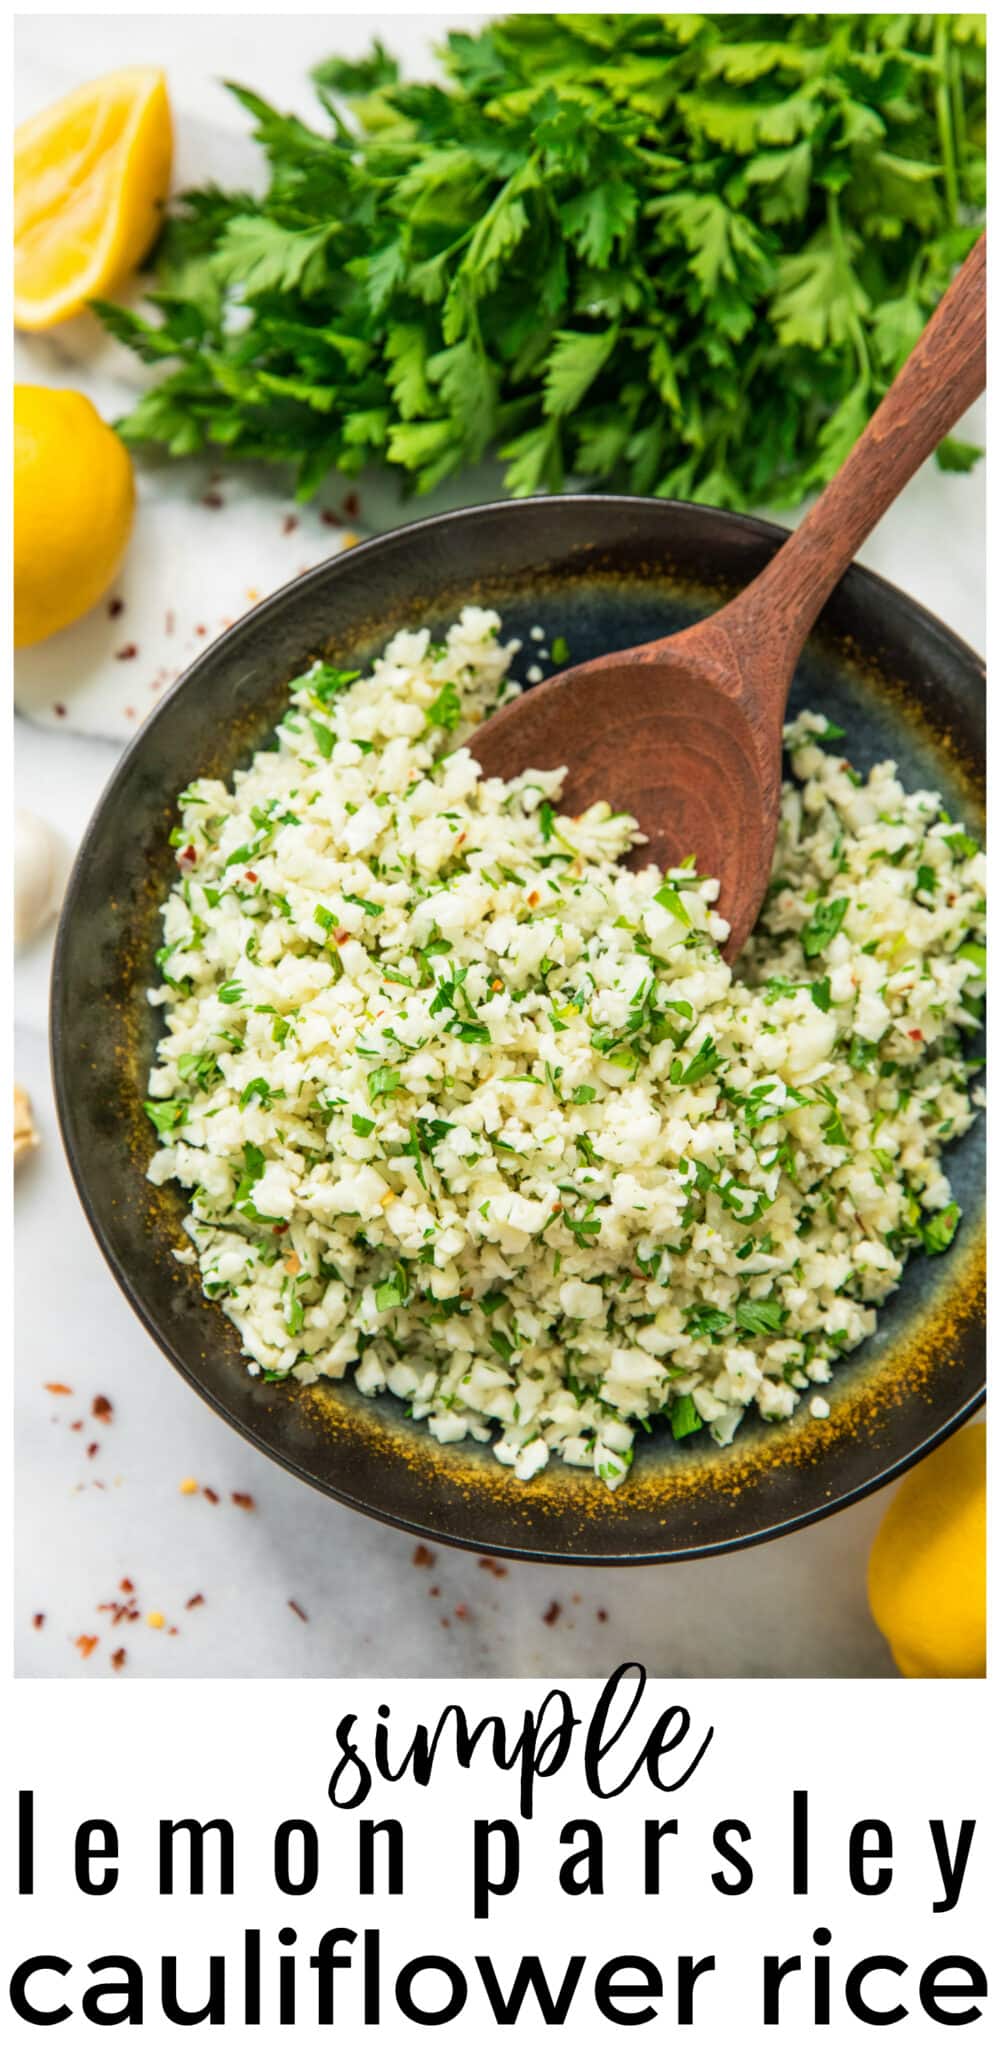 Simple Lemon Parsley Cauliflower Rice in a black bowl with wooden serving spoon